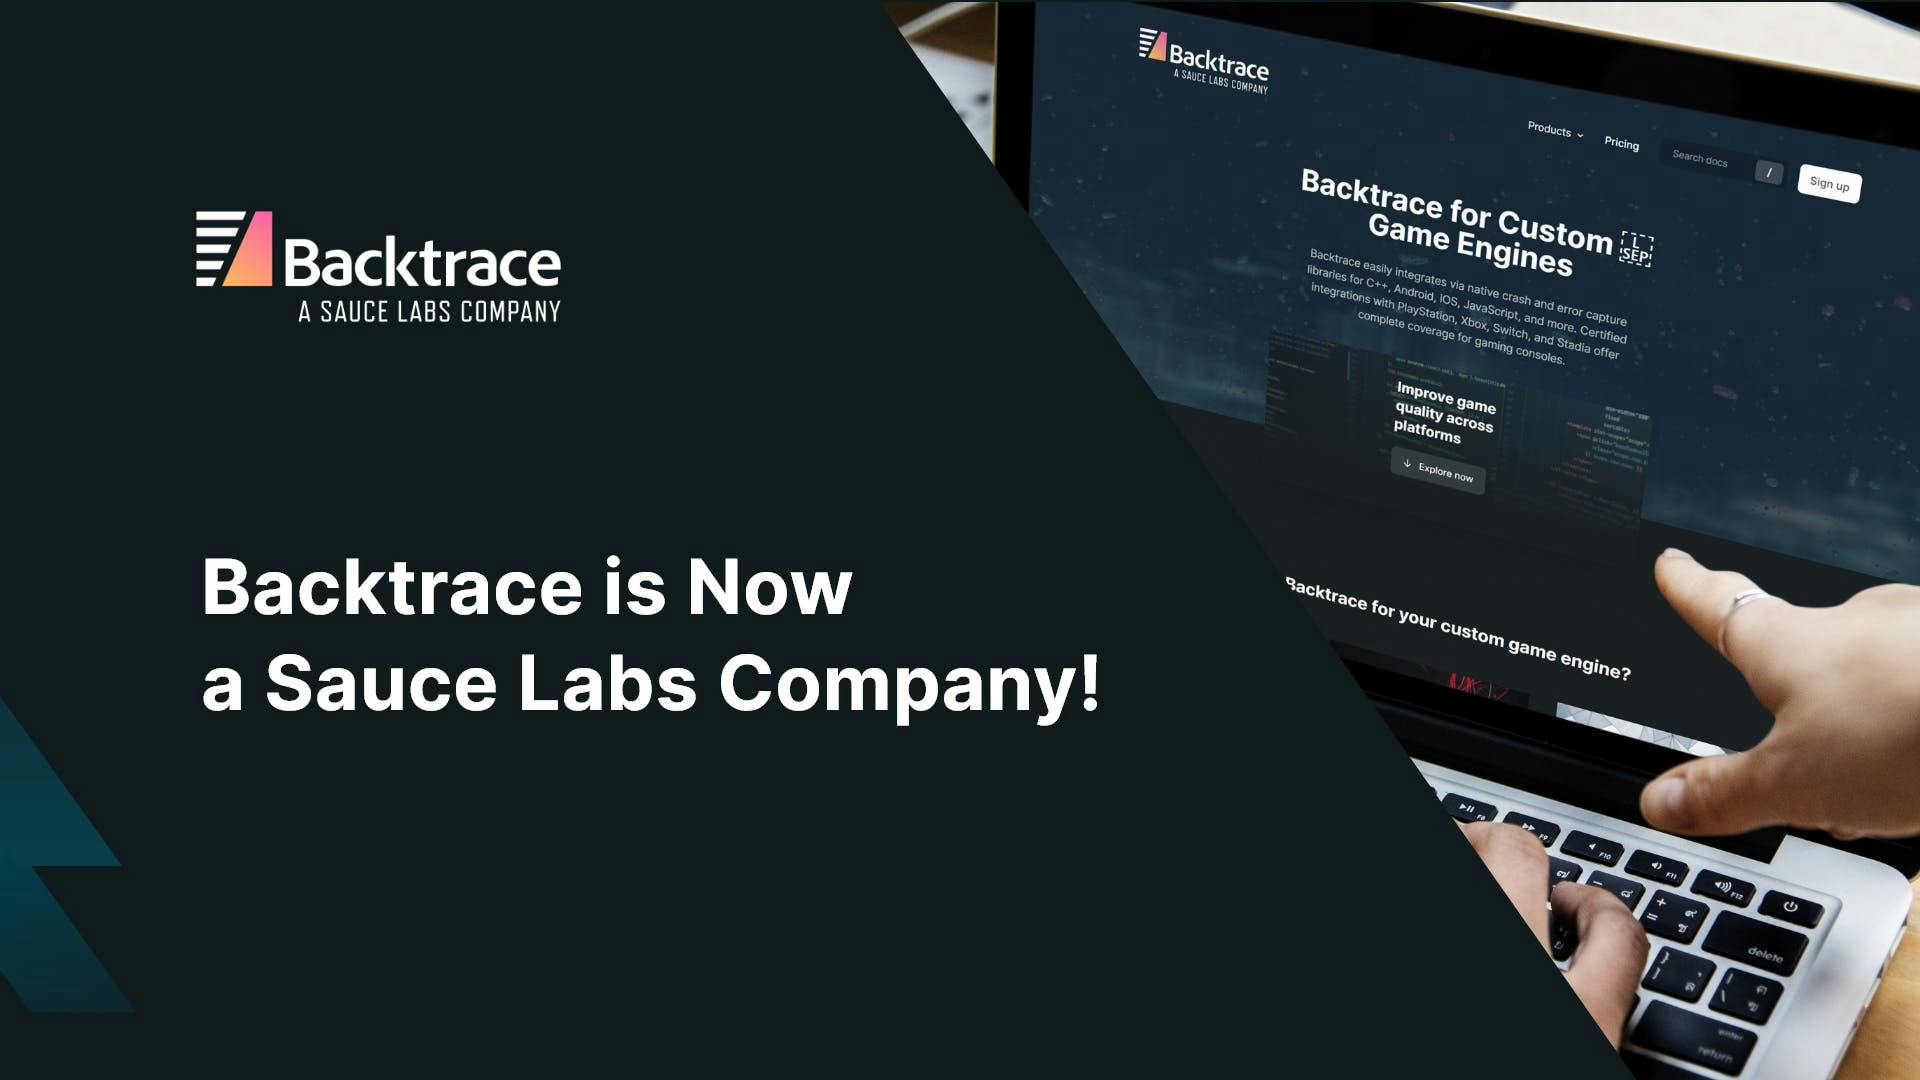 Thumbnail image for blog post: Backtrace Is Now A Sauce Labs Company!